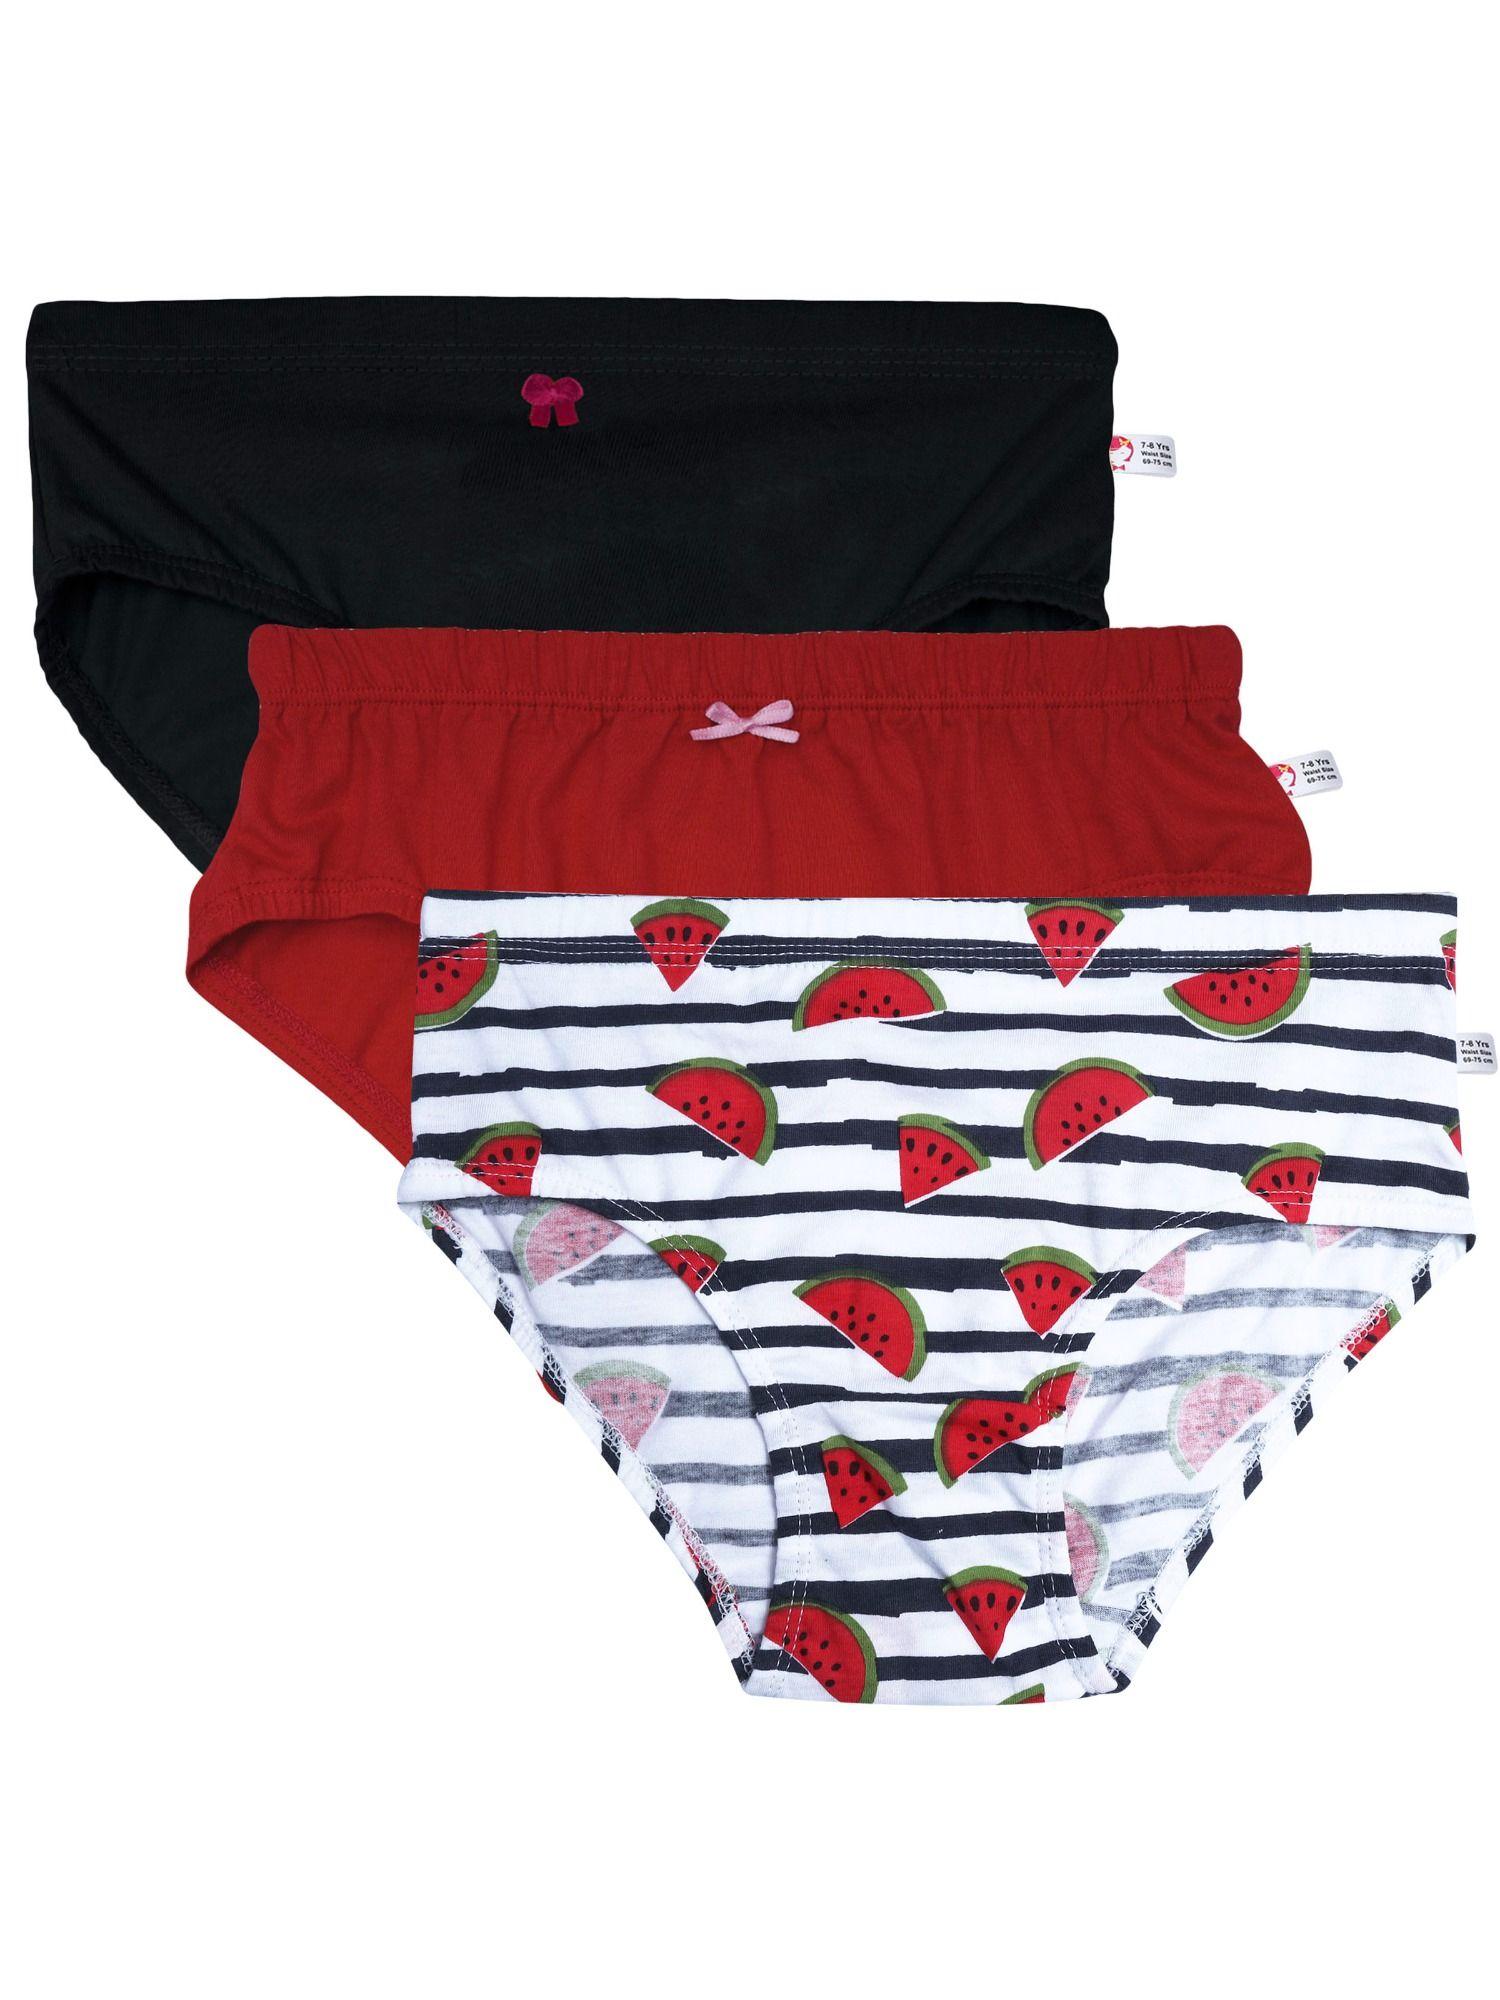 panties for girls 1 watermelon red print and 2 solids (pack of 3)